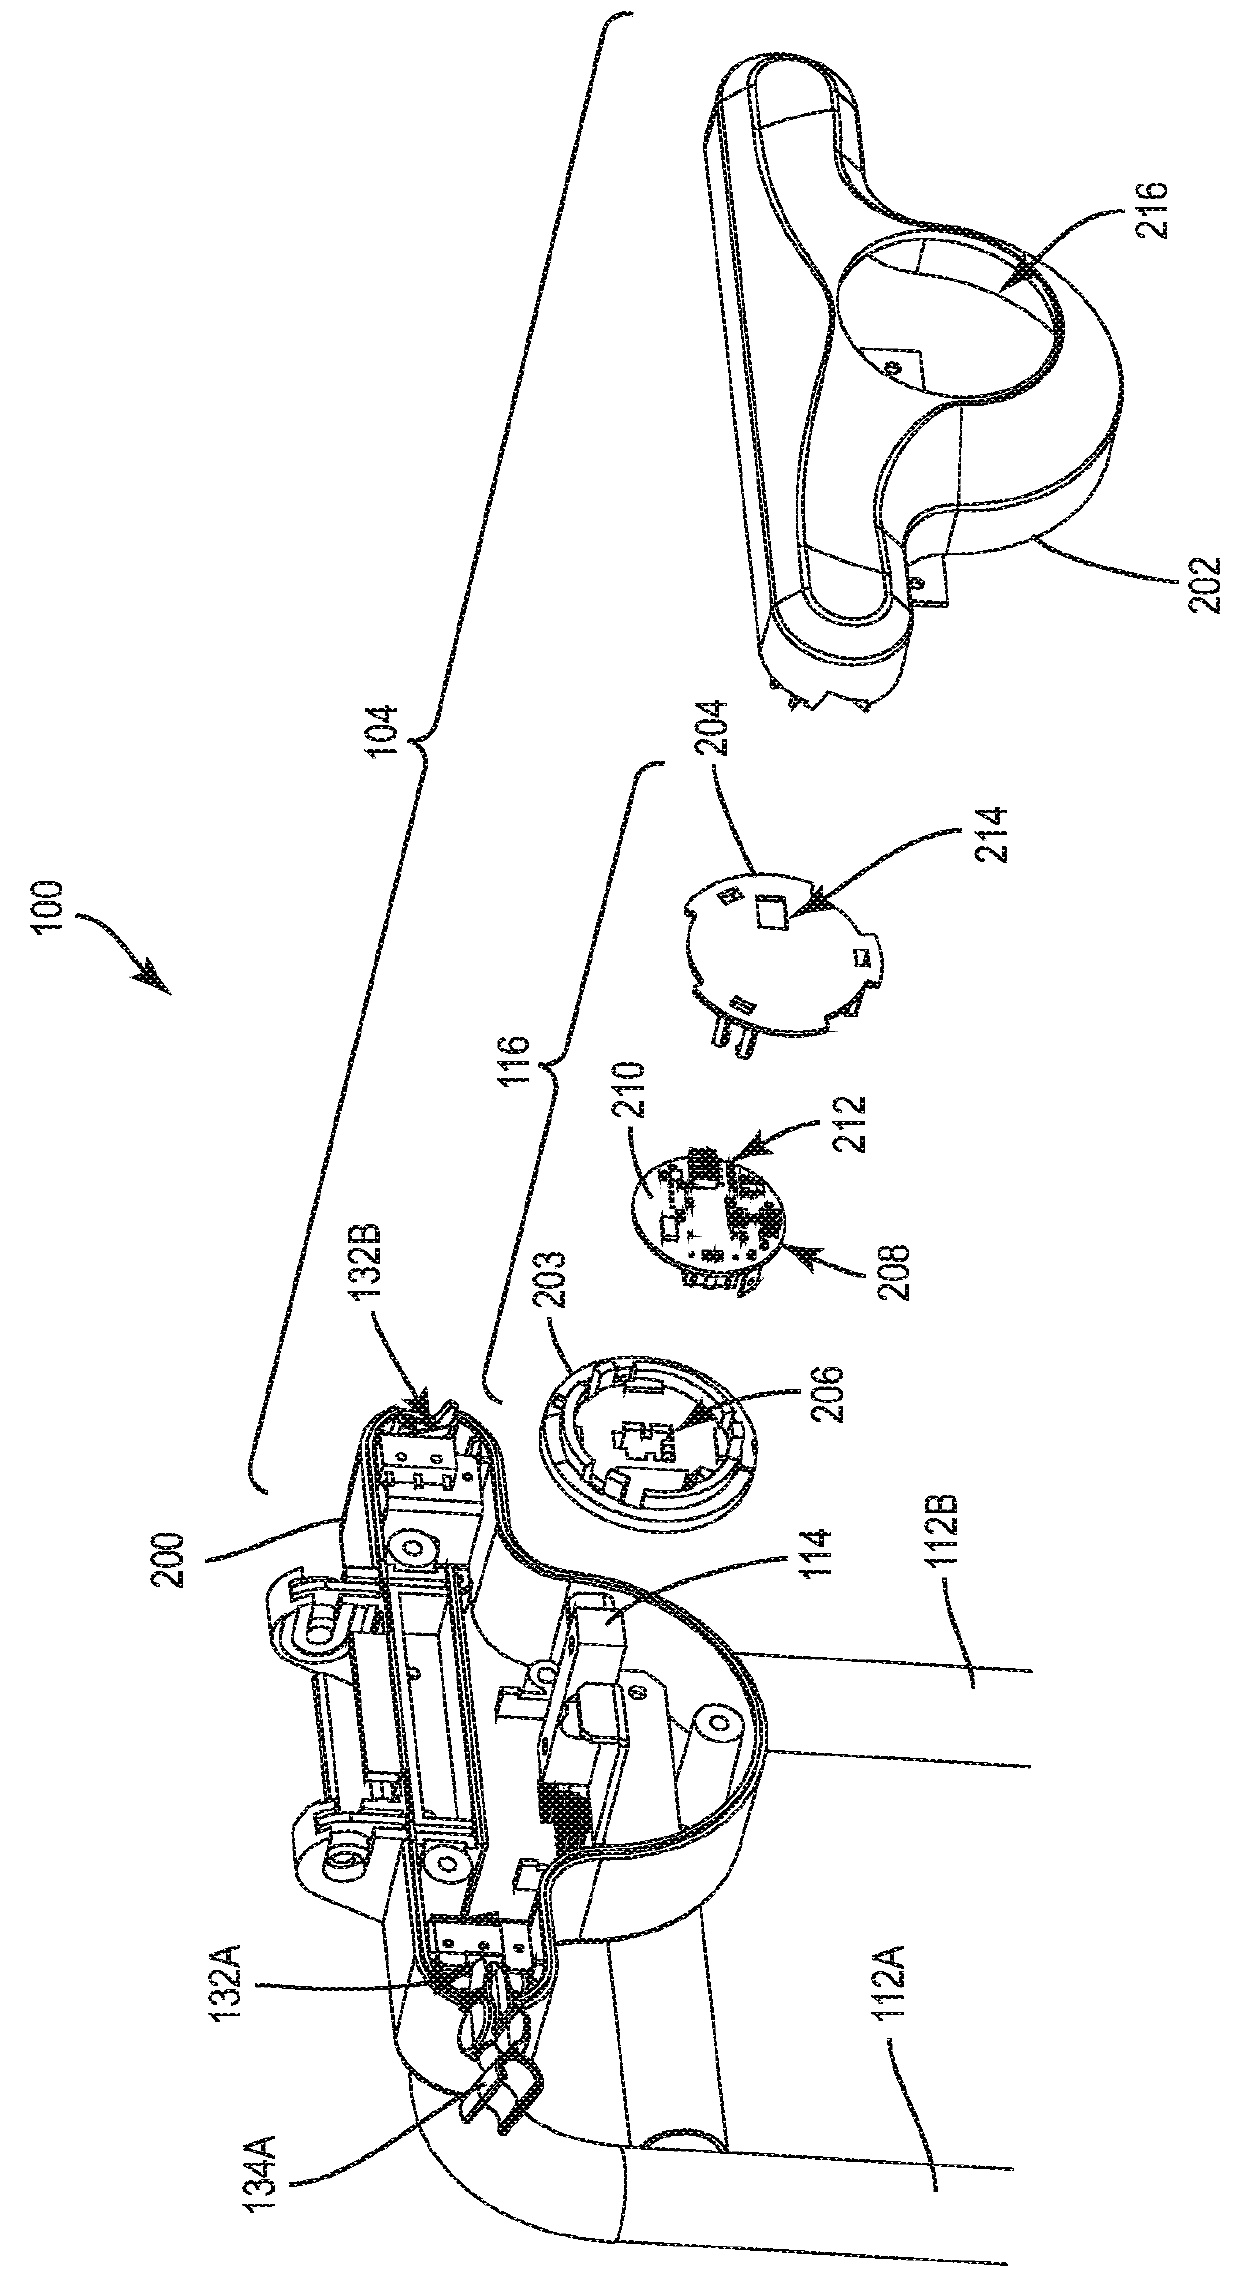 Fluid container measurement system employing load cell linkage member